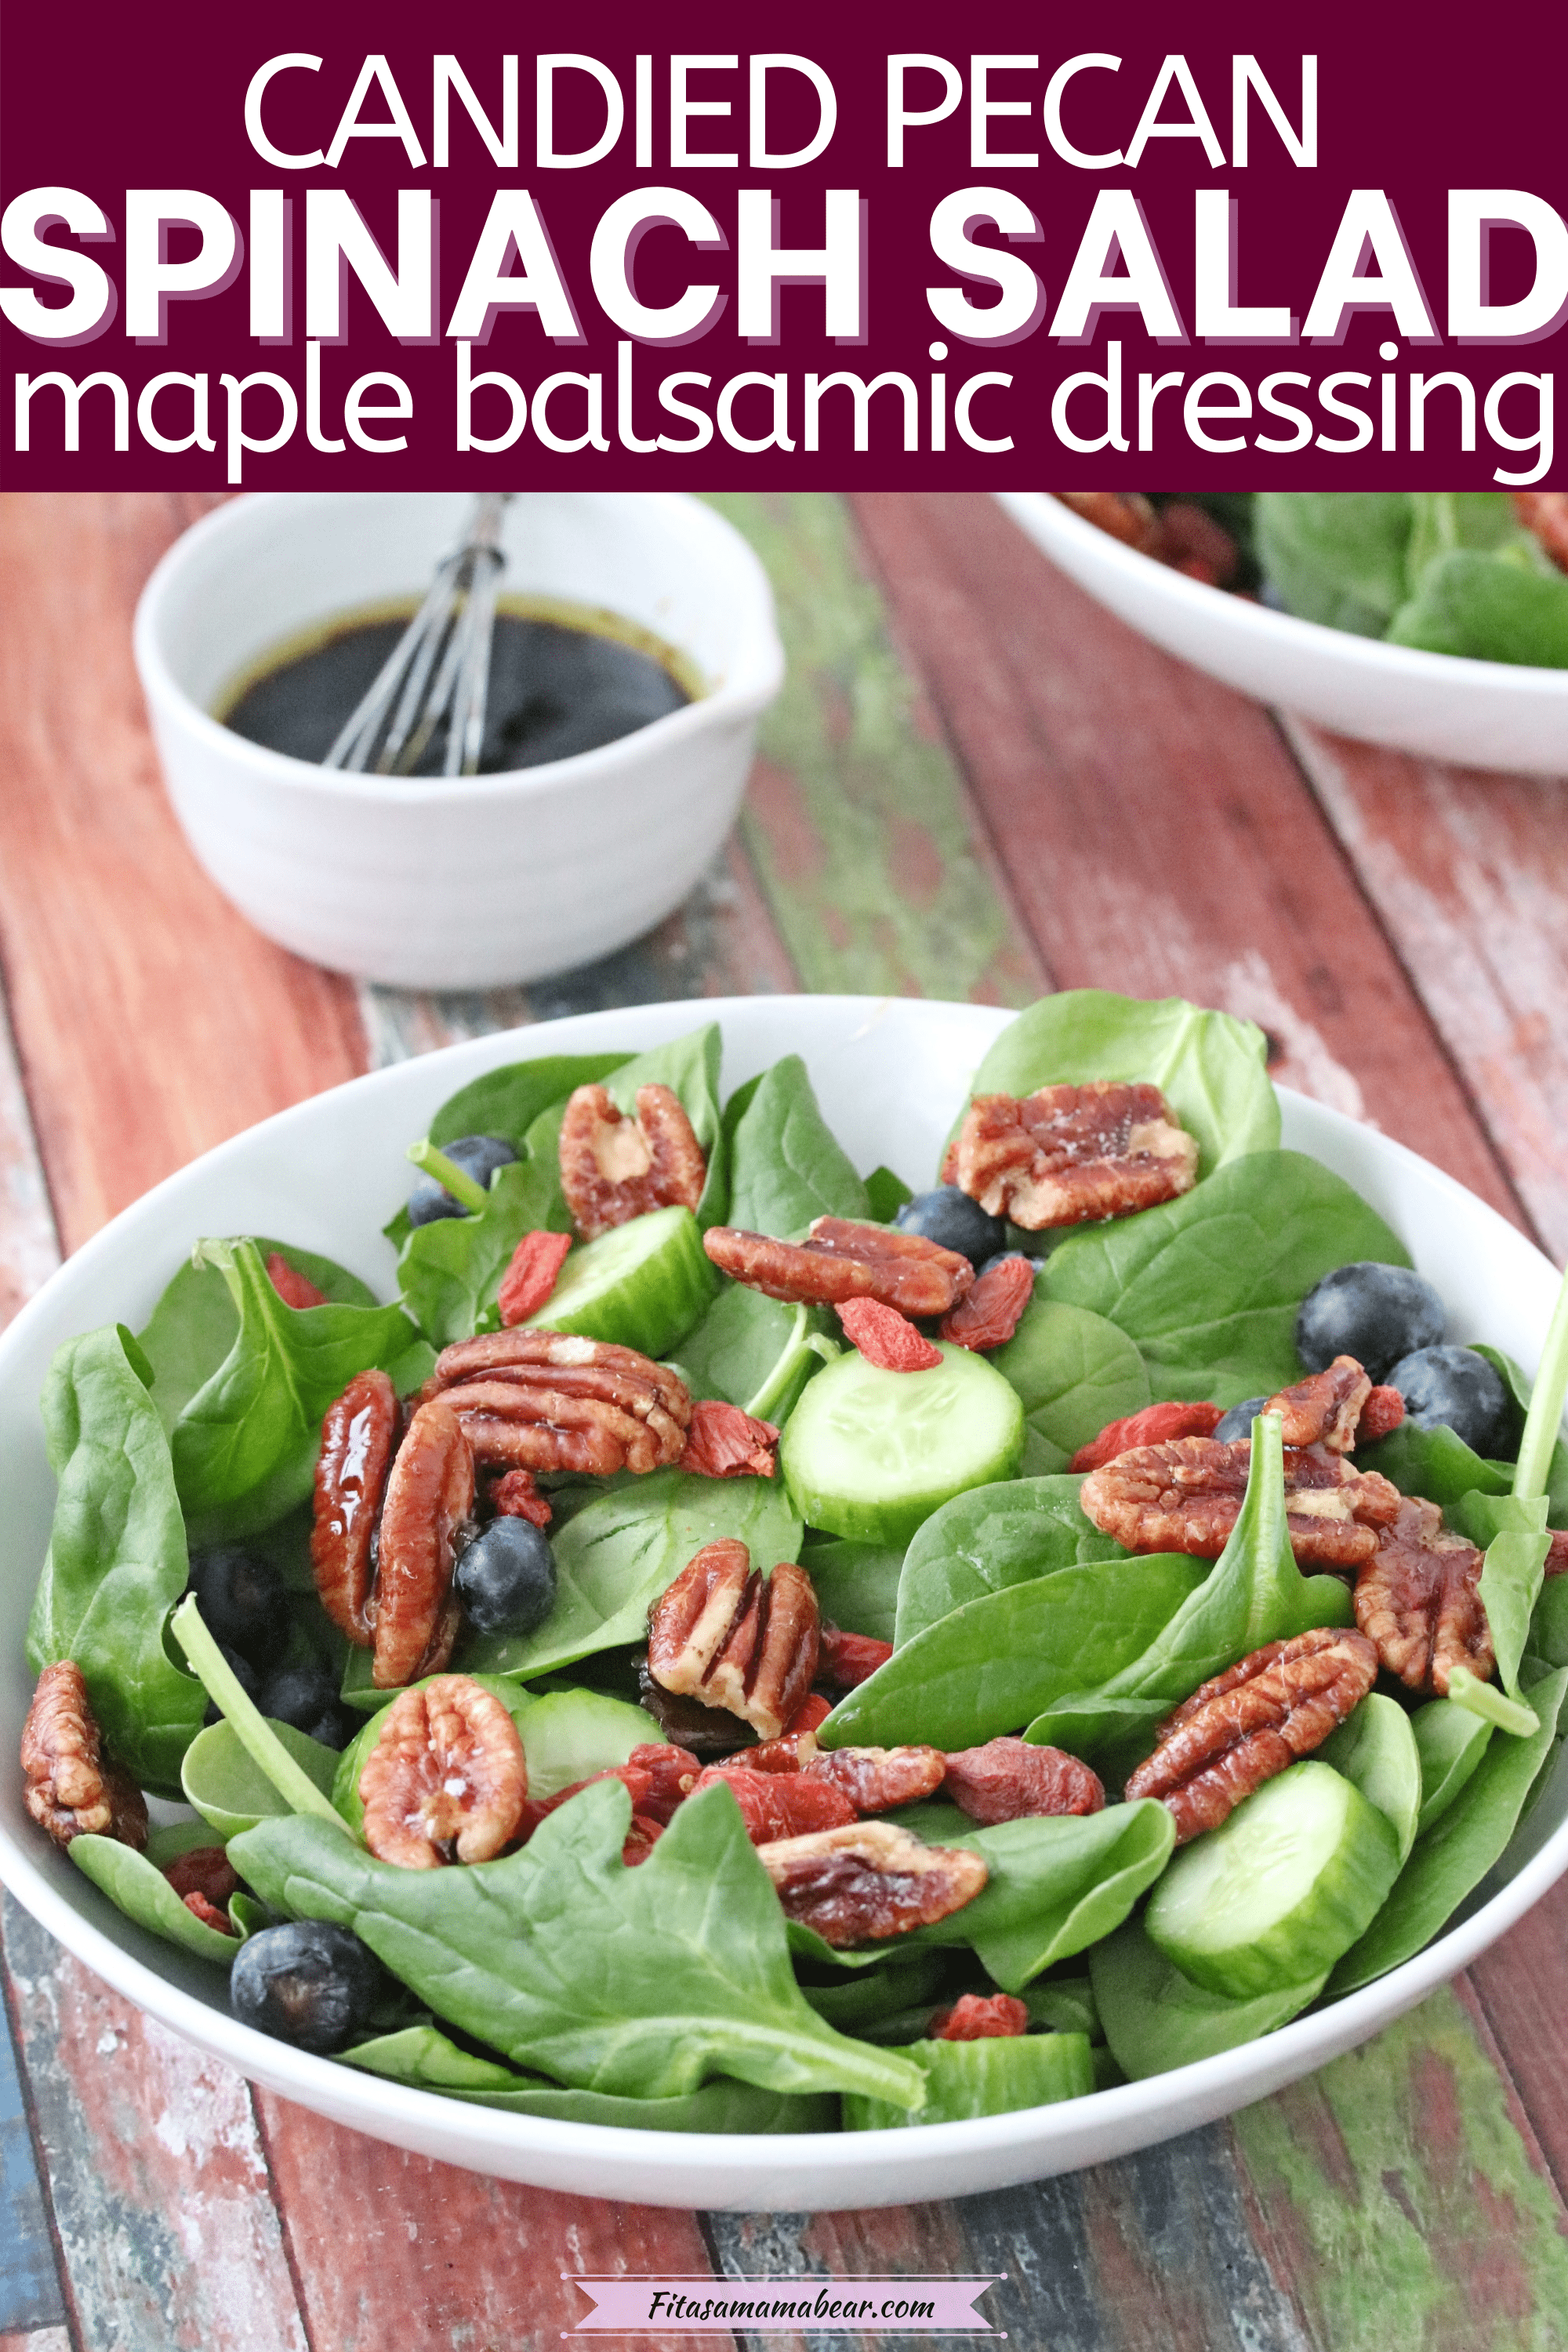 Pinterest image with text: Spinach salad with pecans in a white bowl with another bowl of salad behind it and pecans on the table